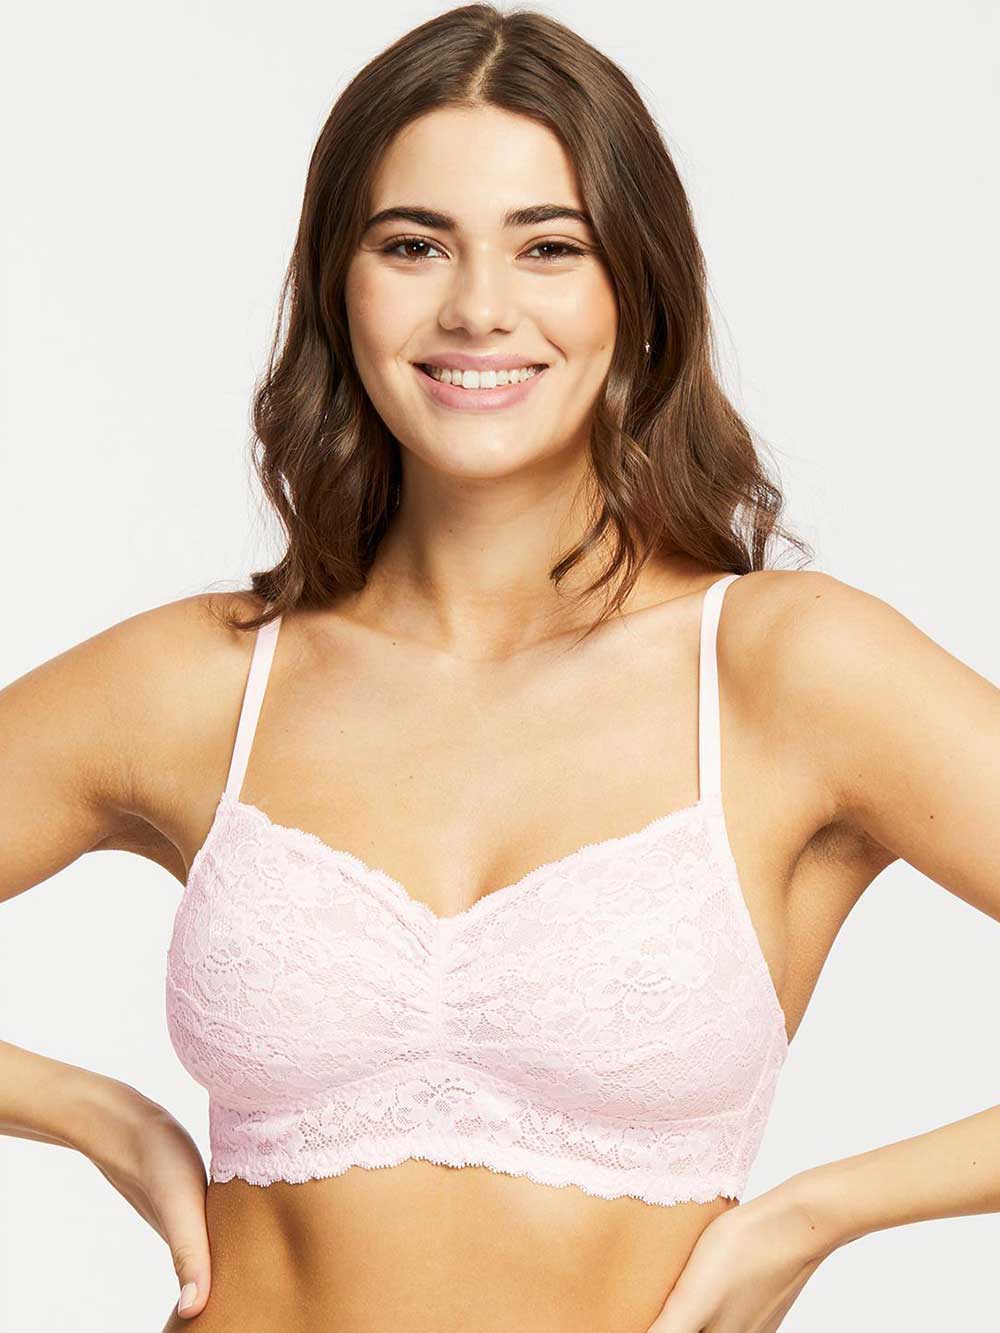 Floral Lace Bra,Wire Bra Bustier Sheer Top Seamless Bralette, Transparent  Cup Wireless Bras (Color : B, Cup Size : X-Large)